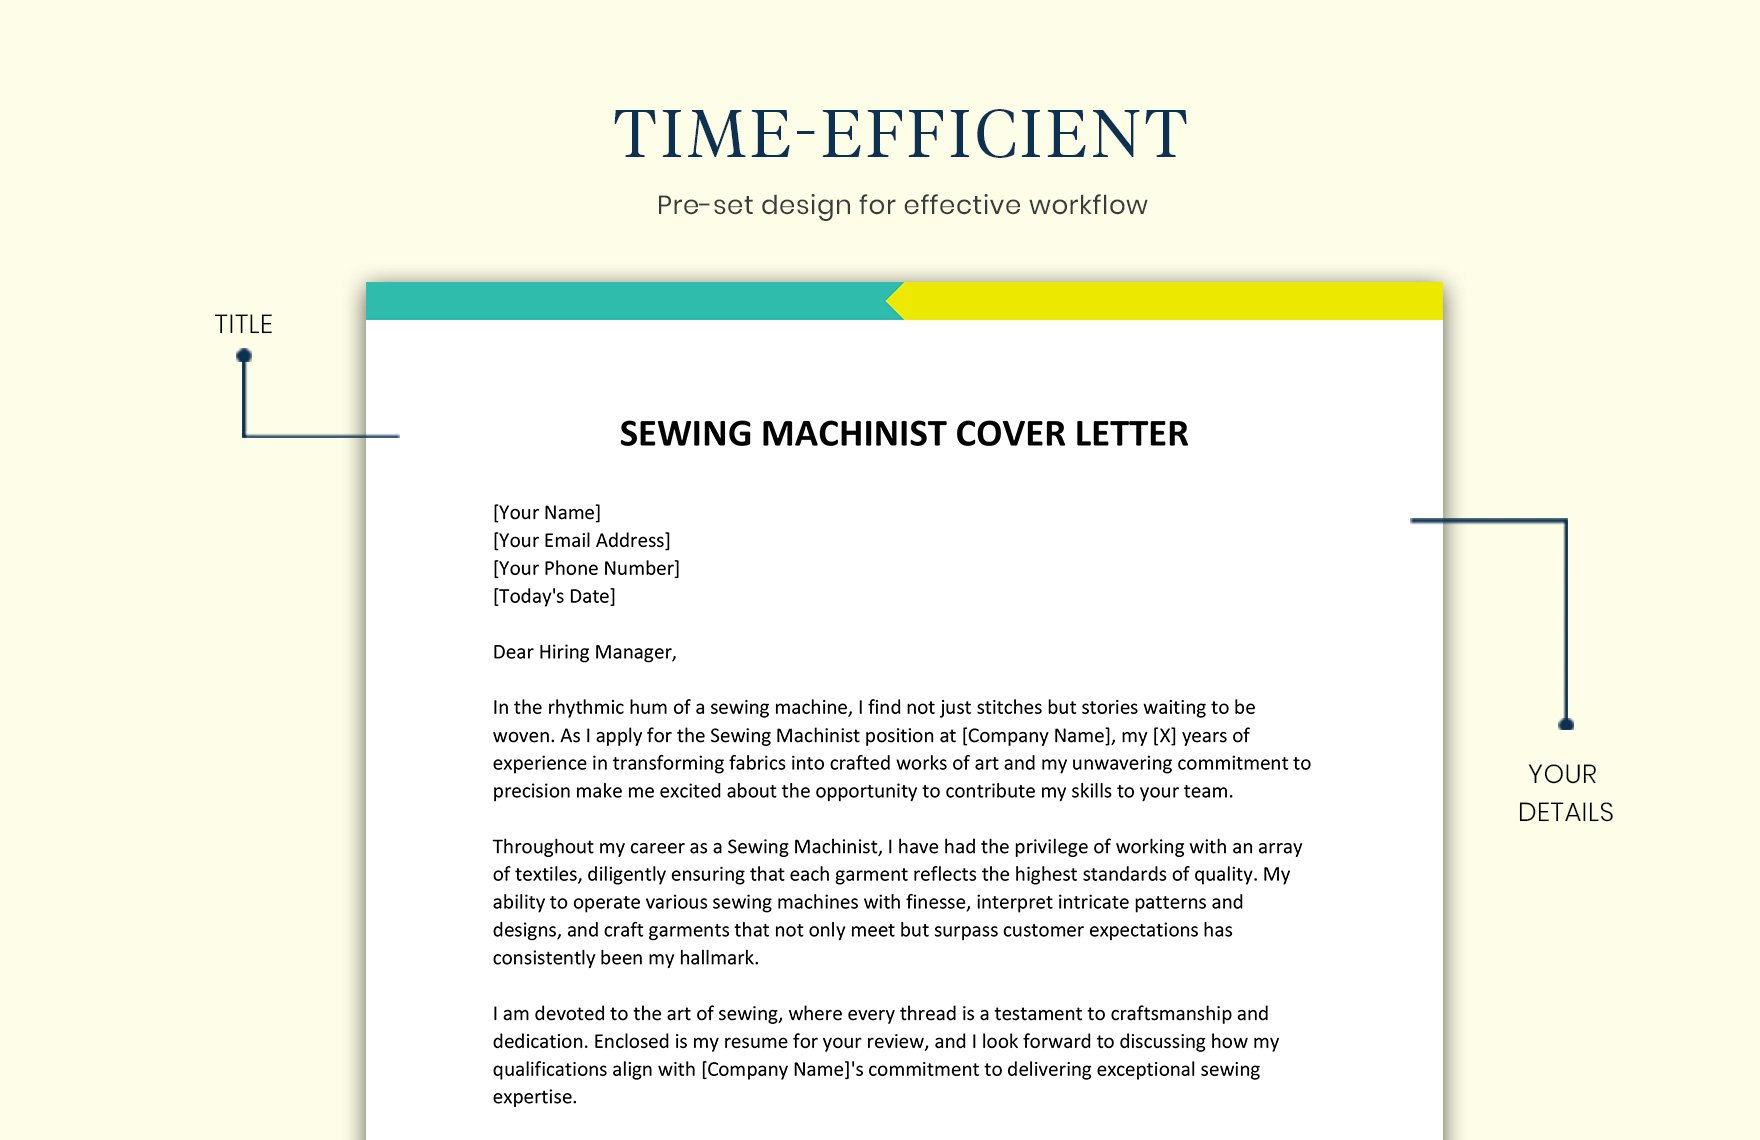 Sewing Machinist Cover Letter